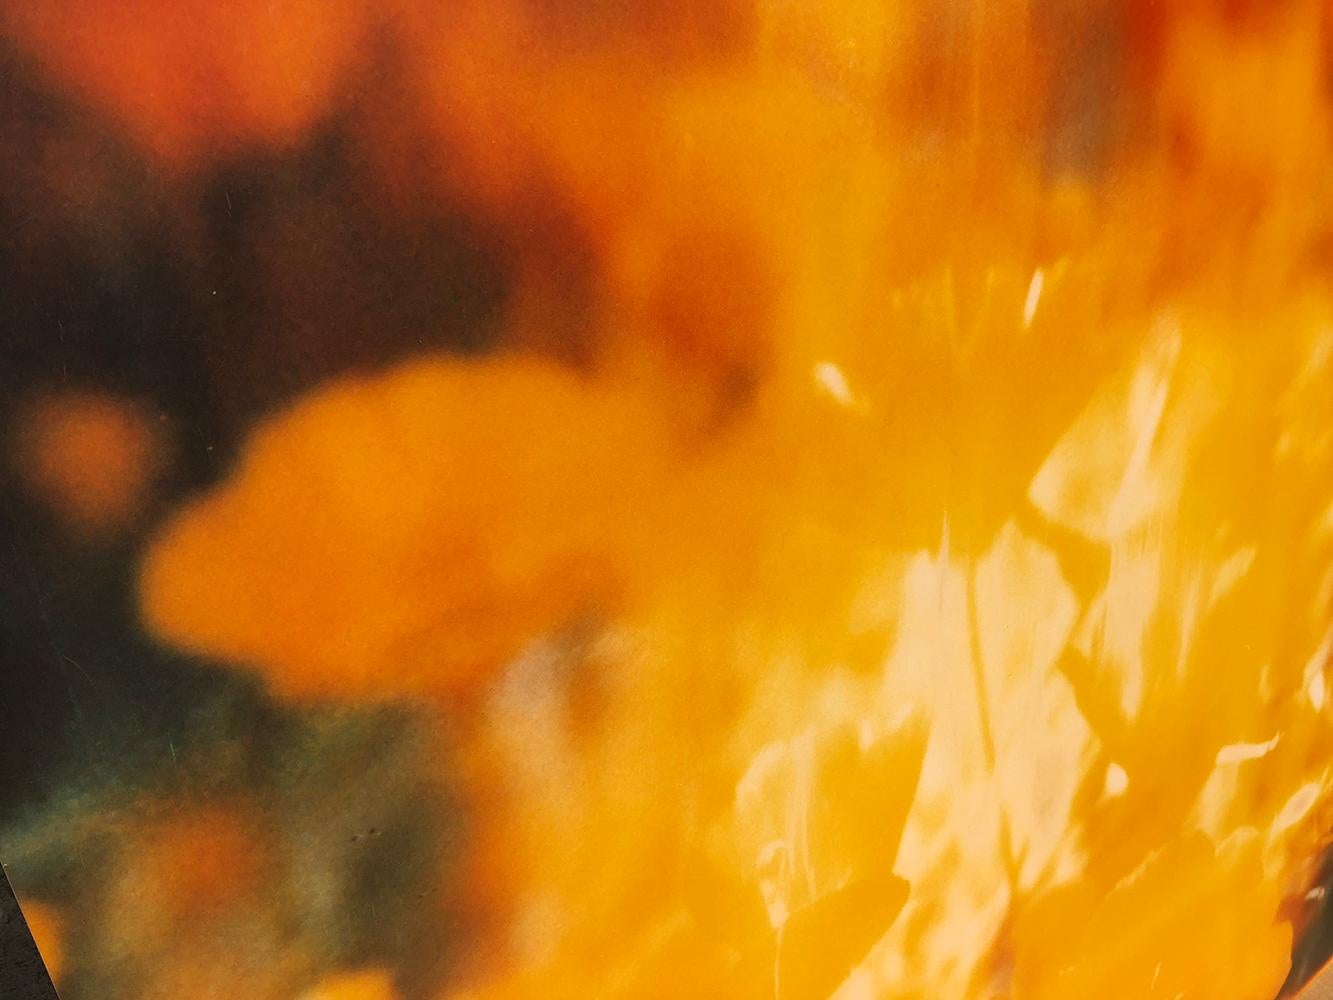 Yellow Flower (The Last Picture Show) - 2005, 

128x125cm, Edition 4/5, 
analog C-Print, hand-printed by the artist on Fuji Crystal Archive Paper, 
based on a Polaroid, 
sigened on verso, 
Artist Inventory 672.04, 
mounted on Aluminum with matte